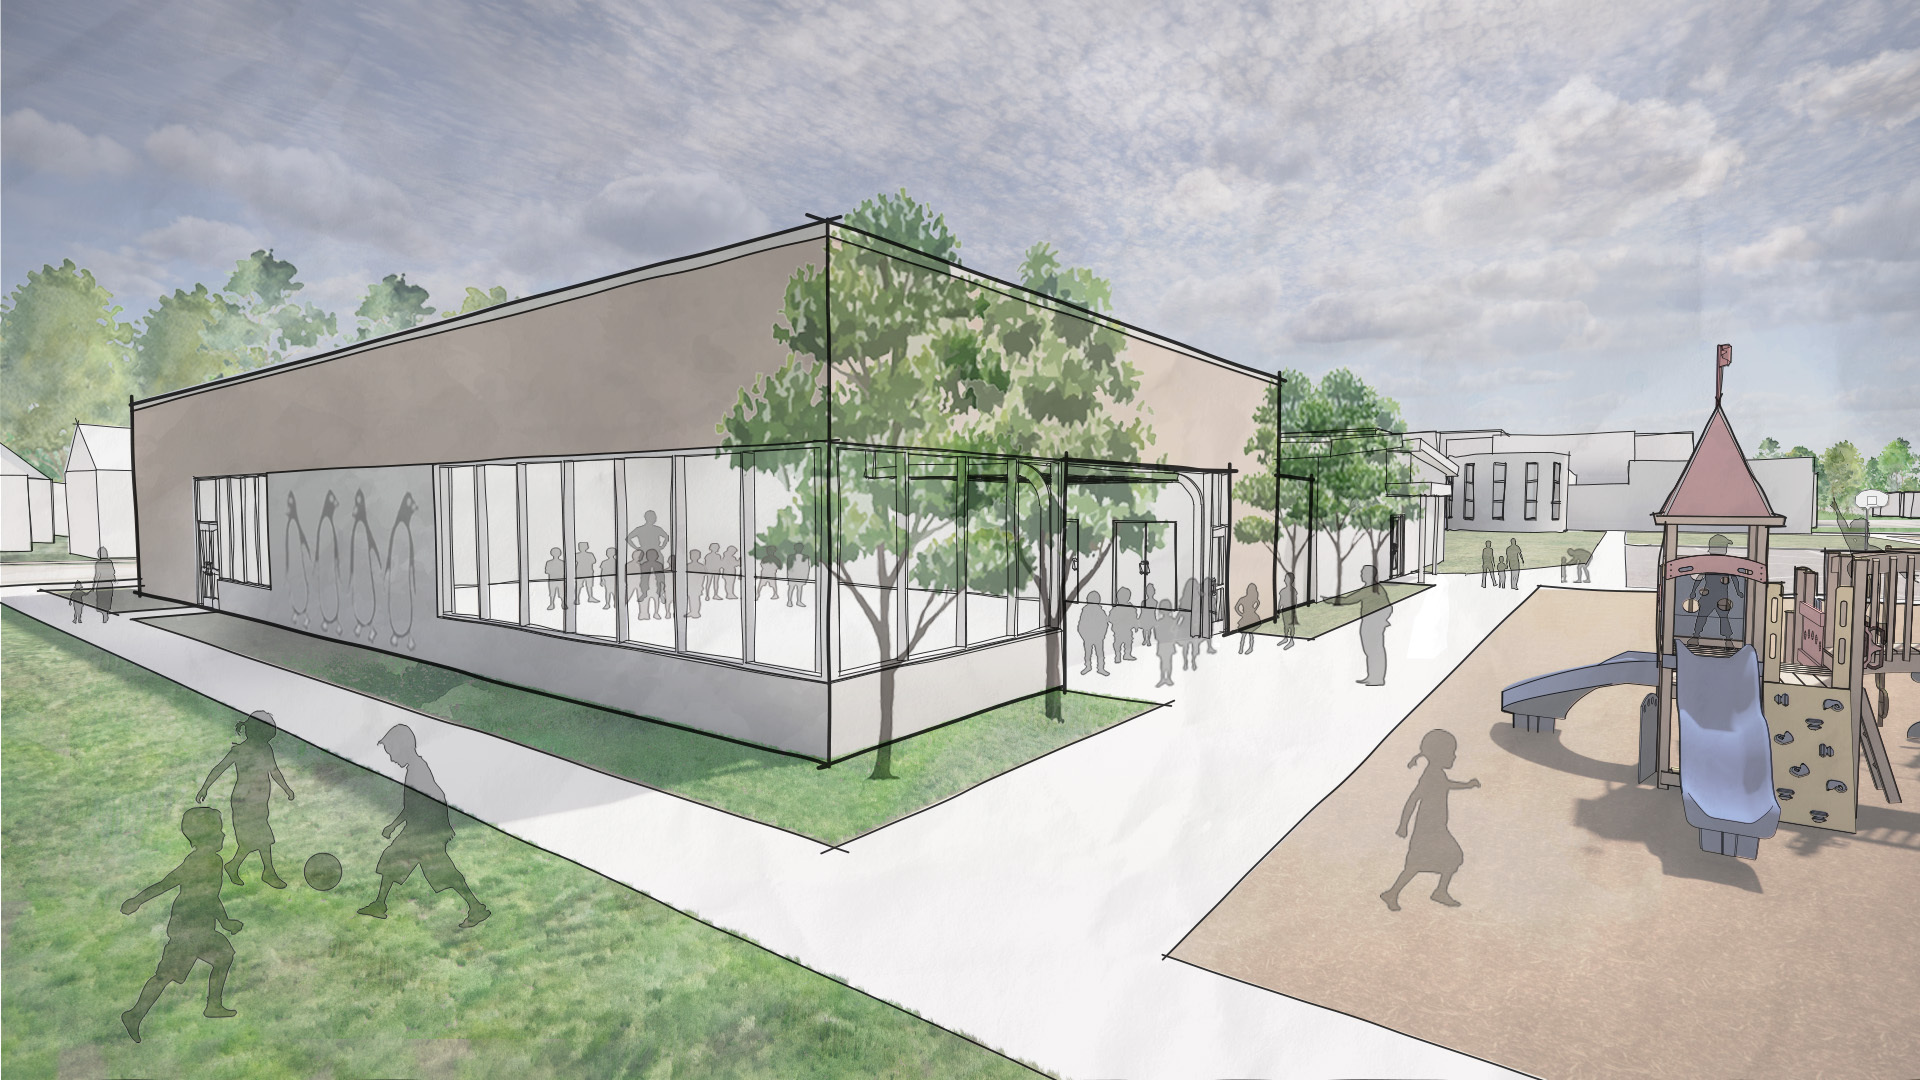 Architecture rendering of a conceptual multi-purpose cafeteria addition at an elementary school.